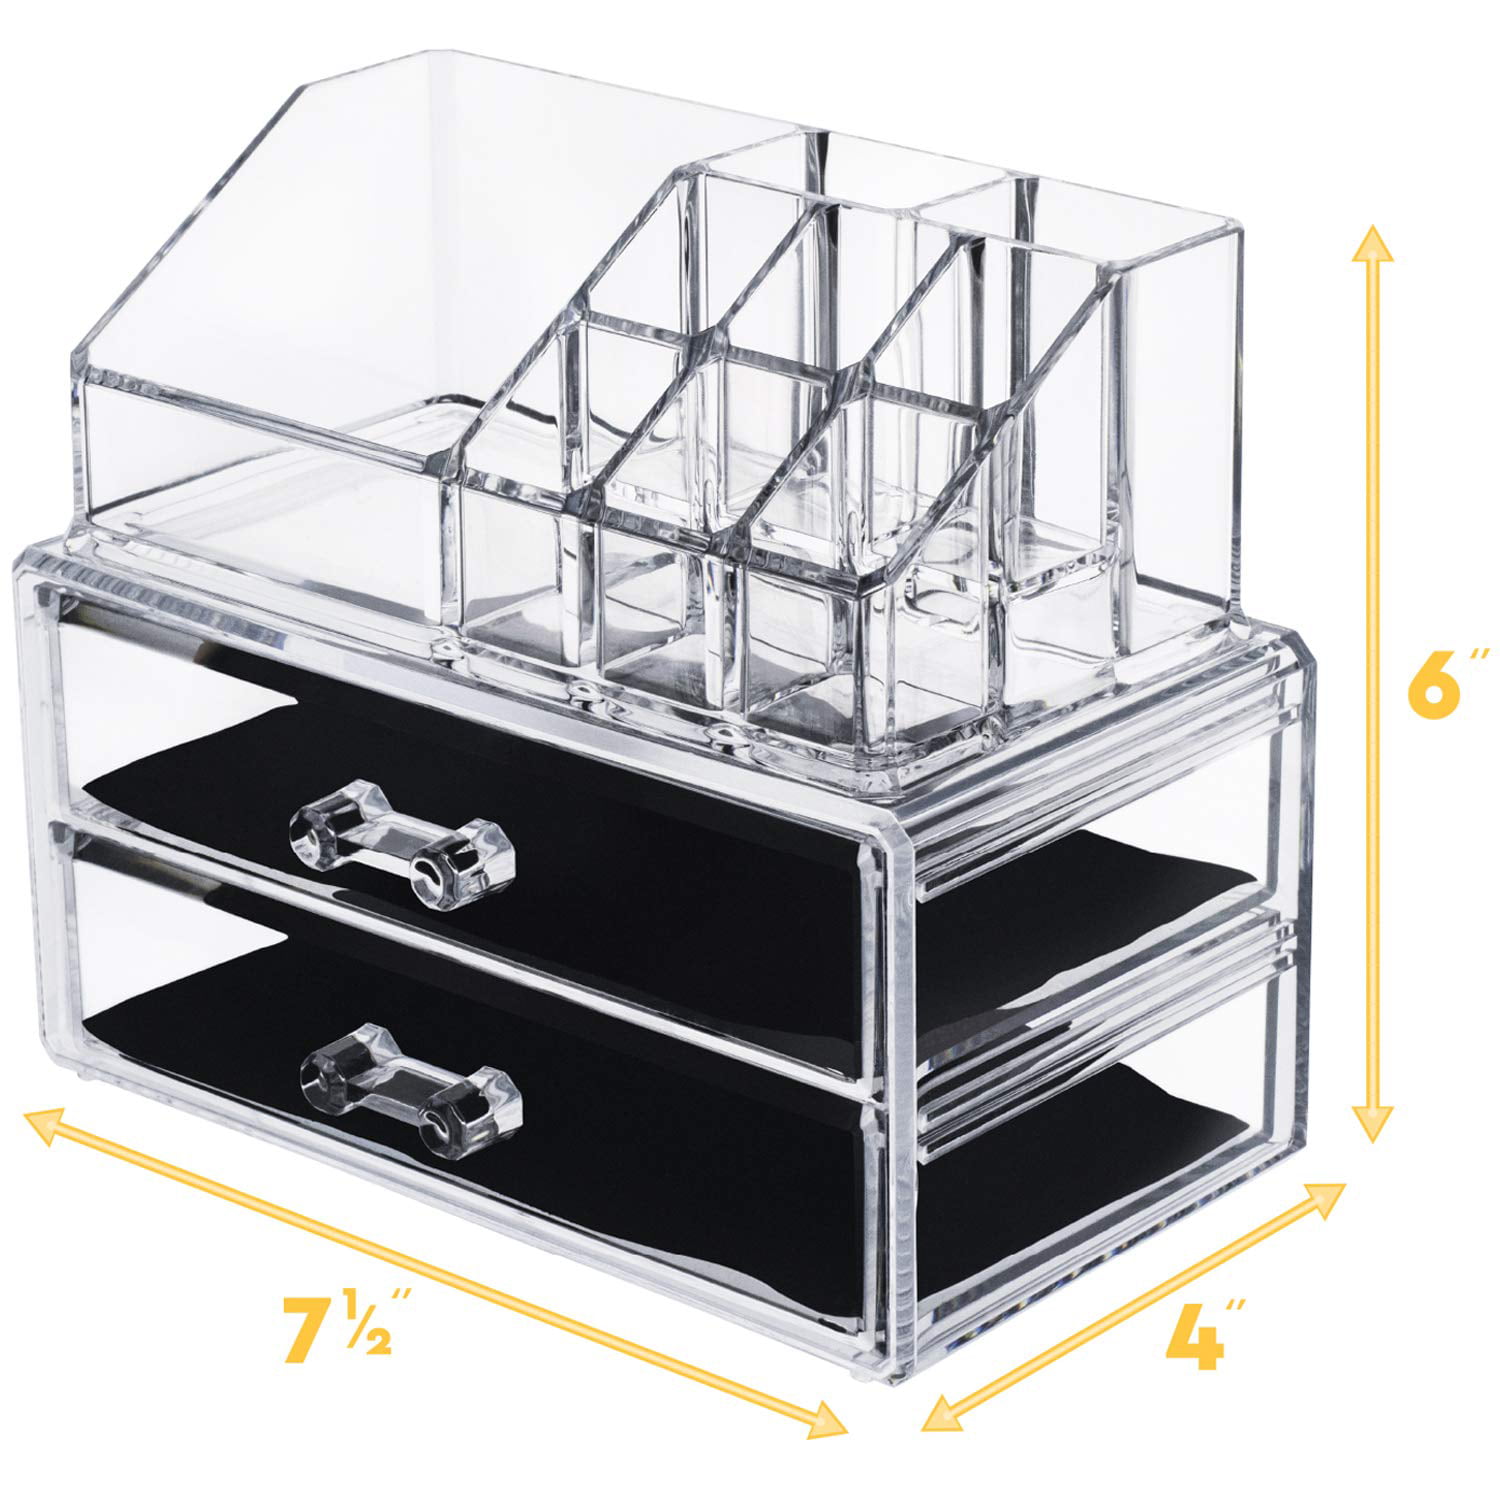 starogegc 2Pack Makeup Organizer Storage, Large Capactiy Acrylic Bathroom Organizer, Clear Cosmetics Organizer Bins with Division Board for Vanity, SK